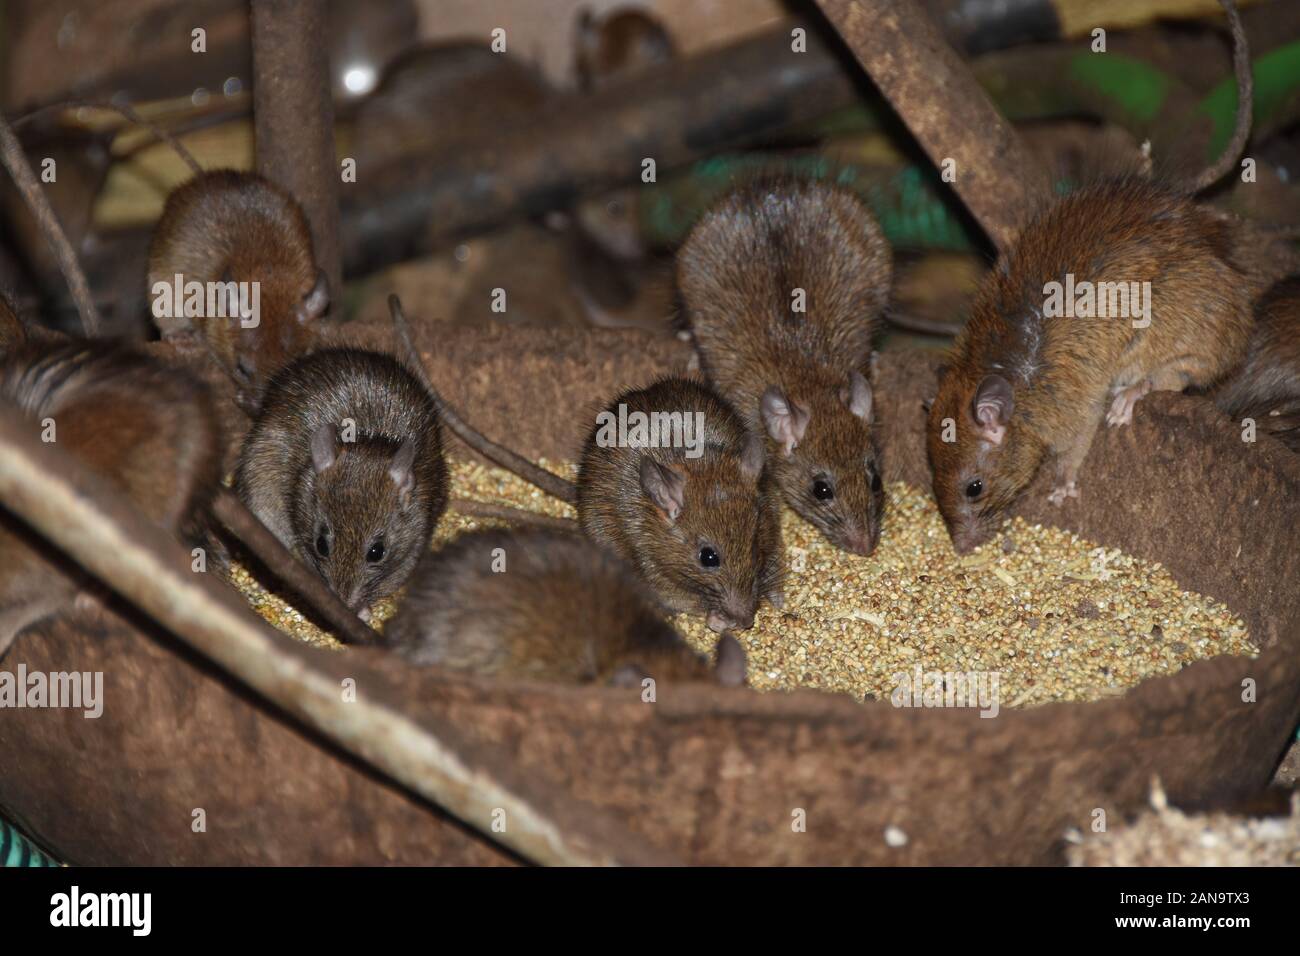 Mice eat food sitting in a line Stock Photo